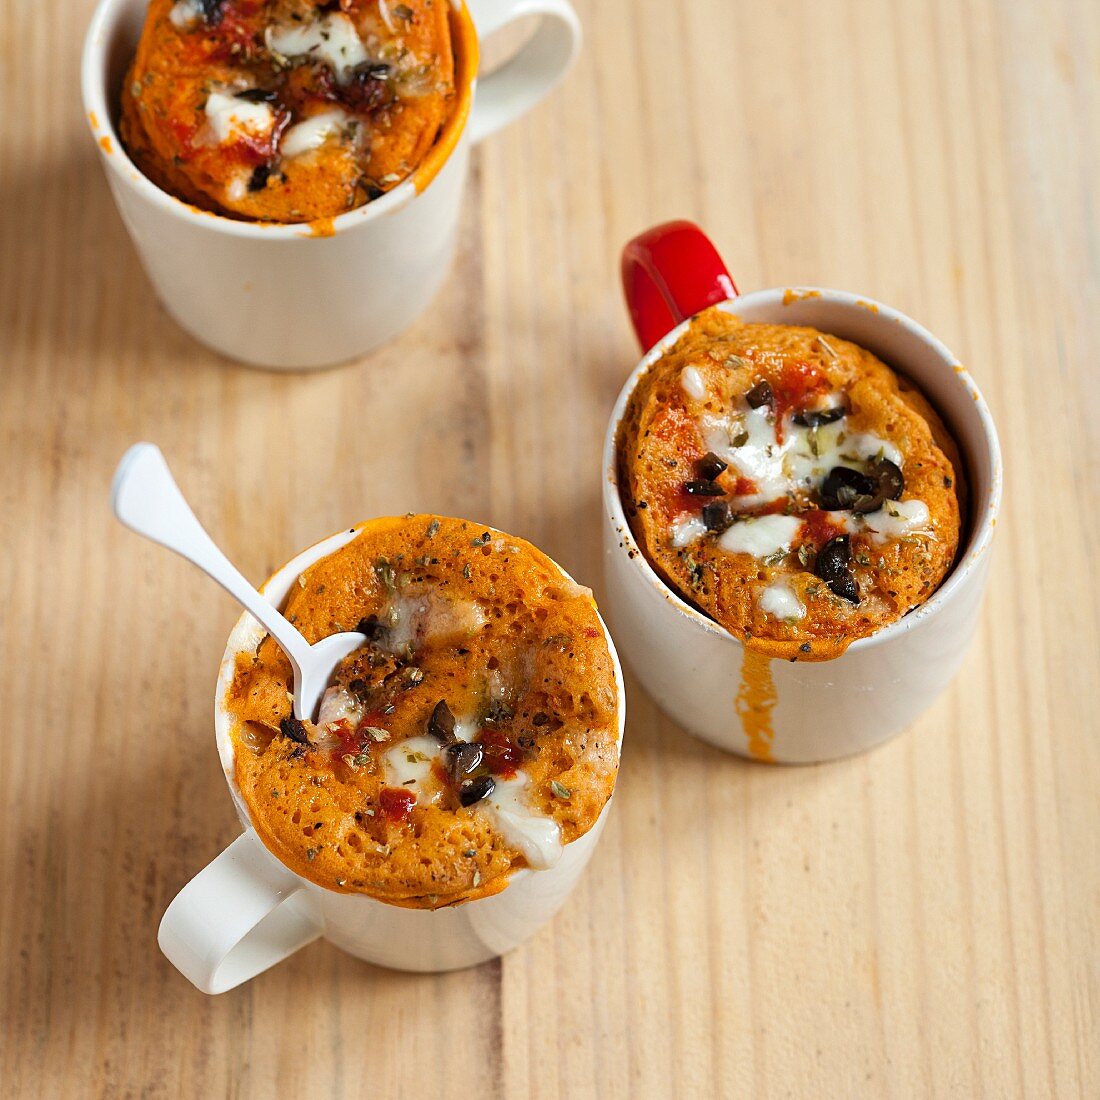 Savoury pizza mug cakes with olives, tomato and cheese